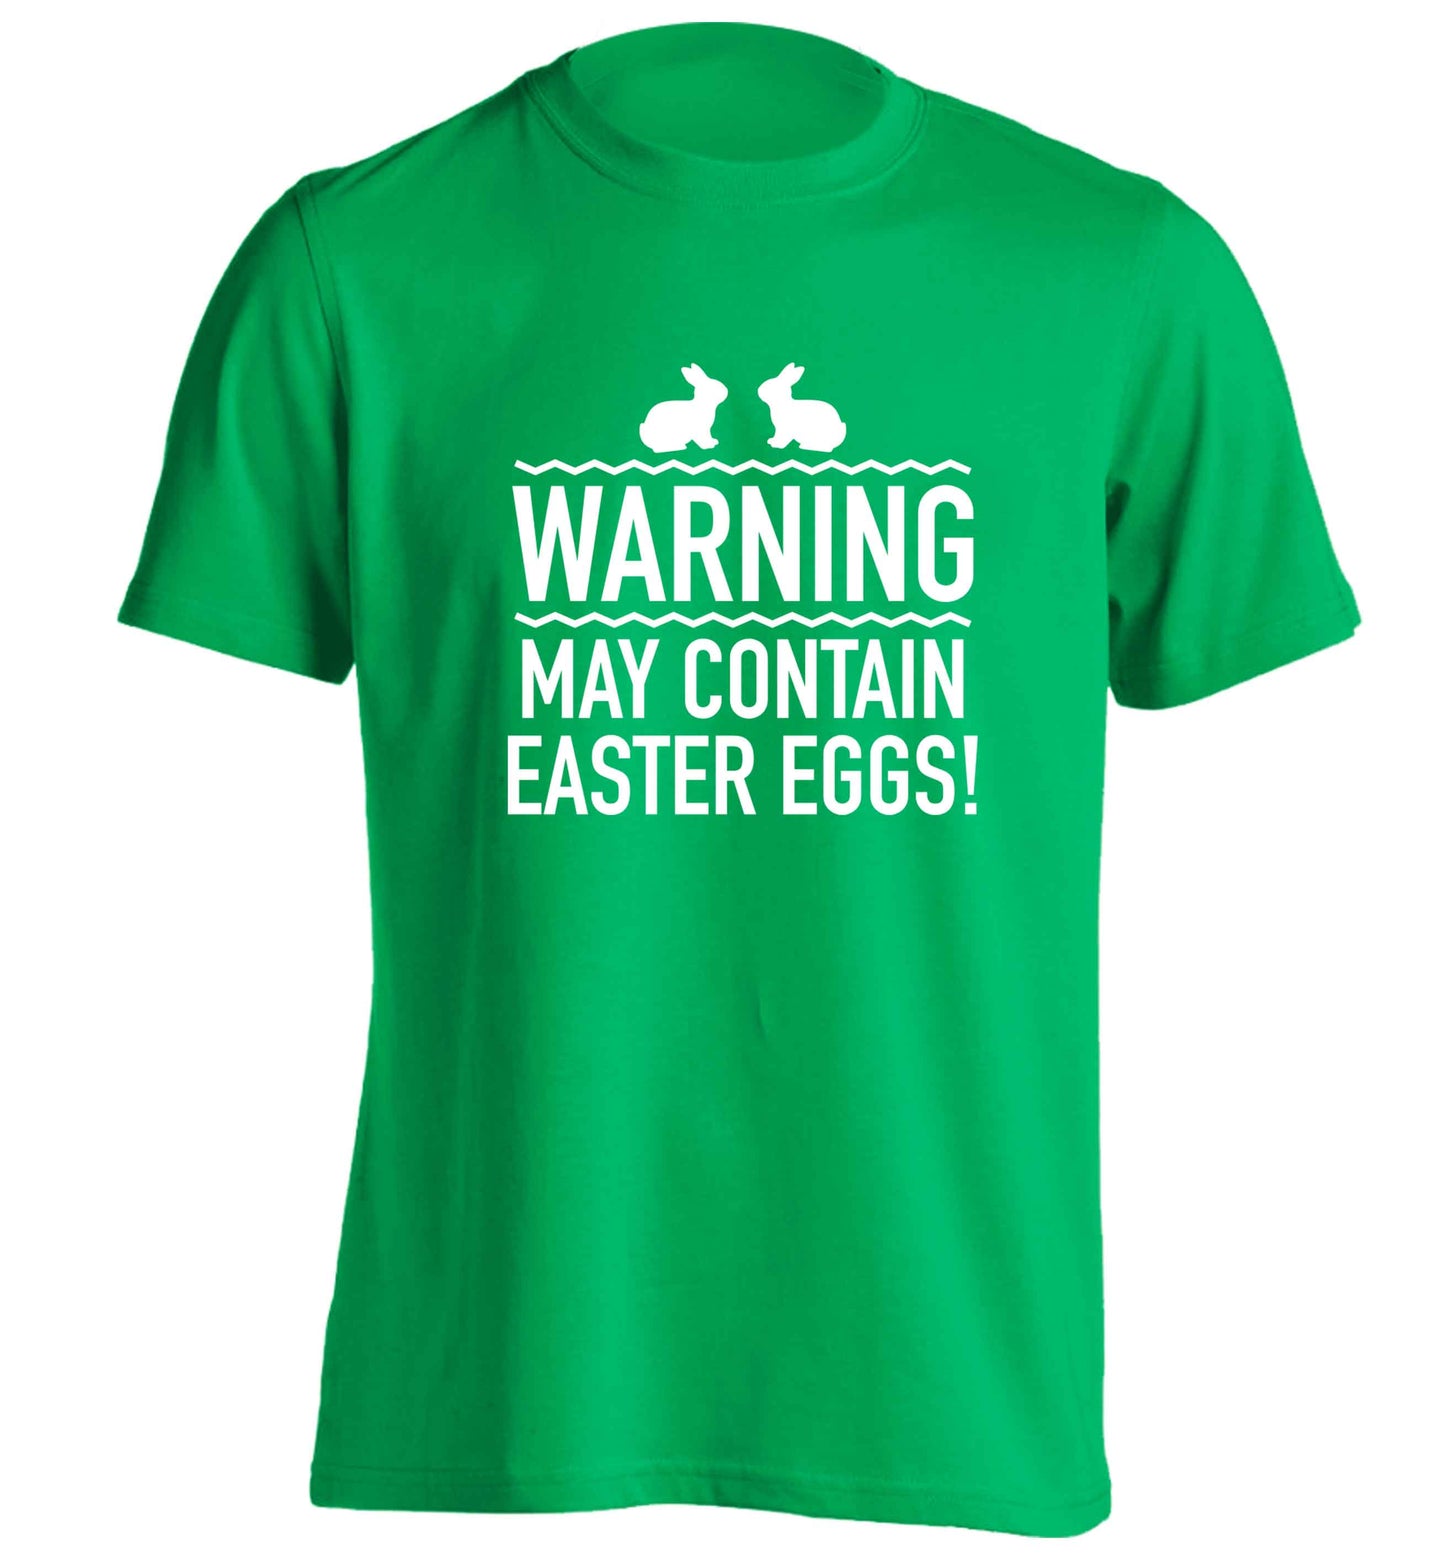 Warning may contain Easter eggs adults unisex green Tshirt 2XL